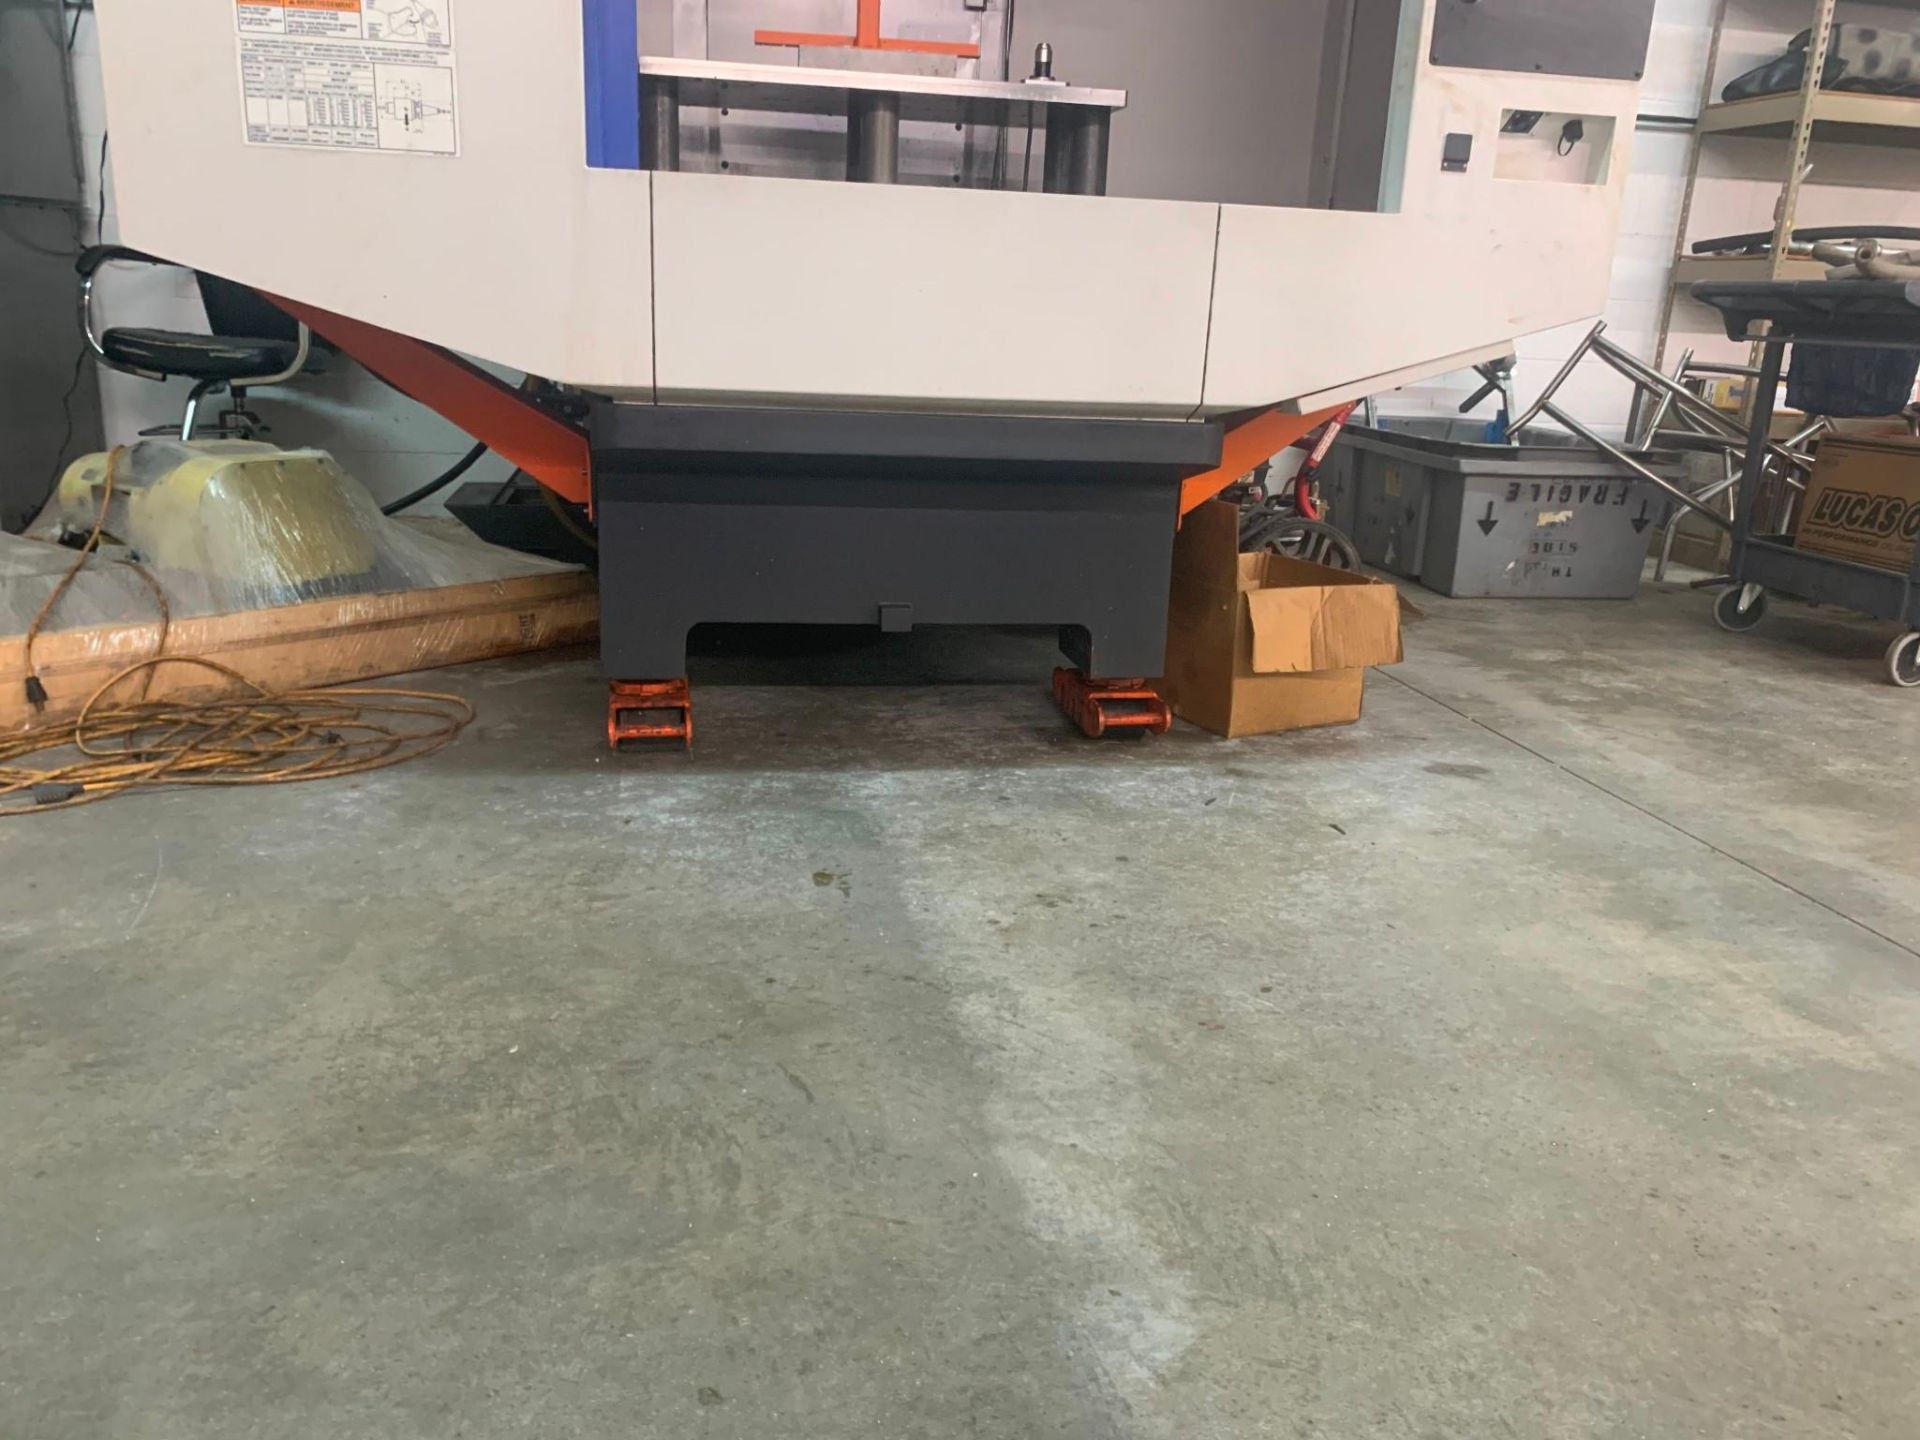 BROTHER SPEEDIO S700 X1 VMC, 2017 - LNS CHIP CONVEYOR, 4TH/5TH NIKKEN ROTARY TABLE, PROBE'S - Image 4 of 12